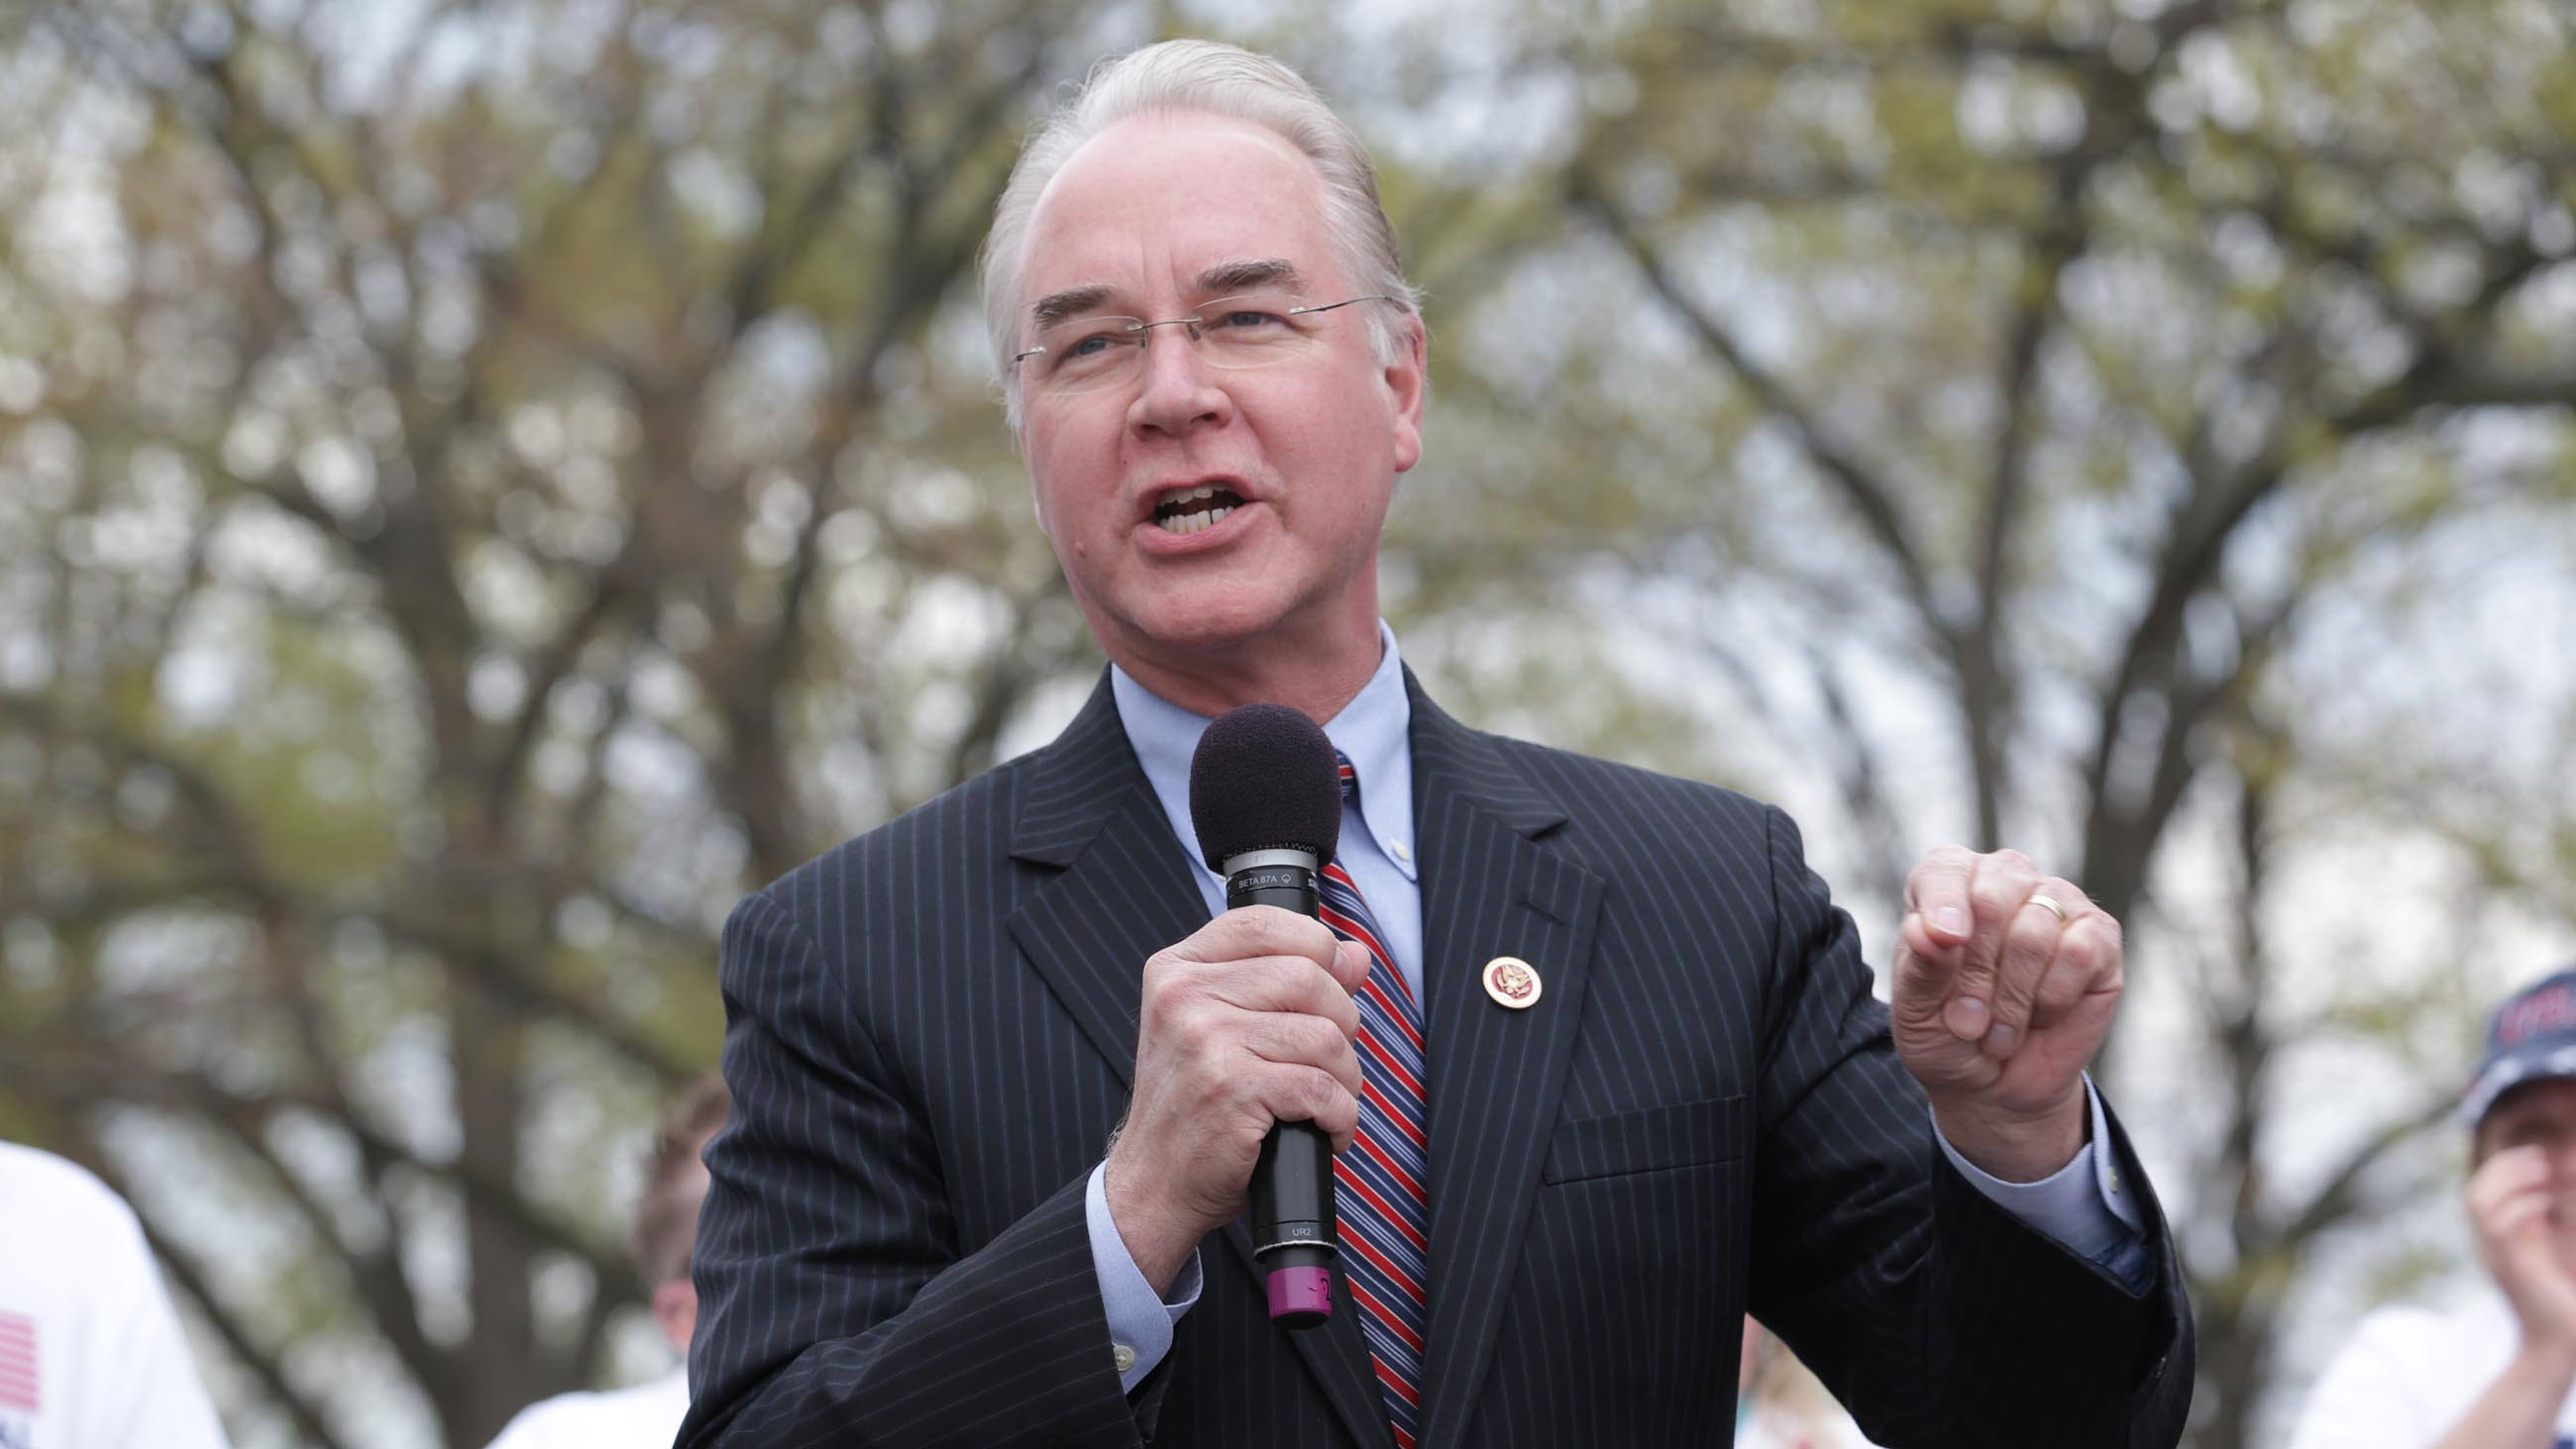 U.S. Rep. Tom Price has been tapped to head up the Department of Health and Human Services. Women (and others) should be afraid.